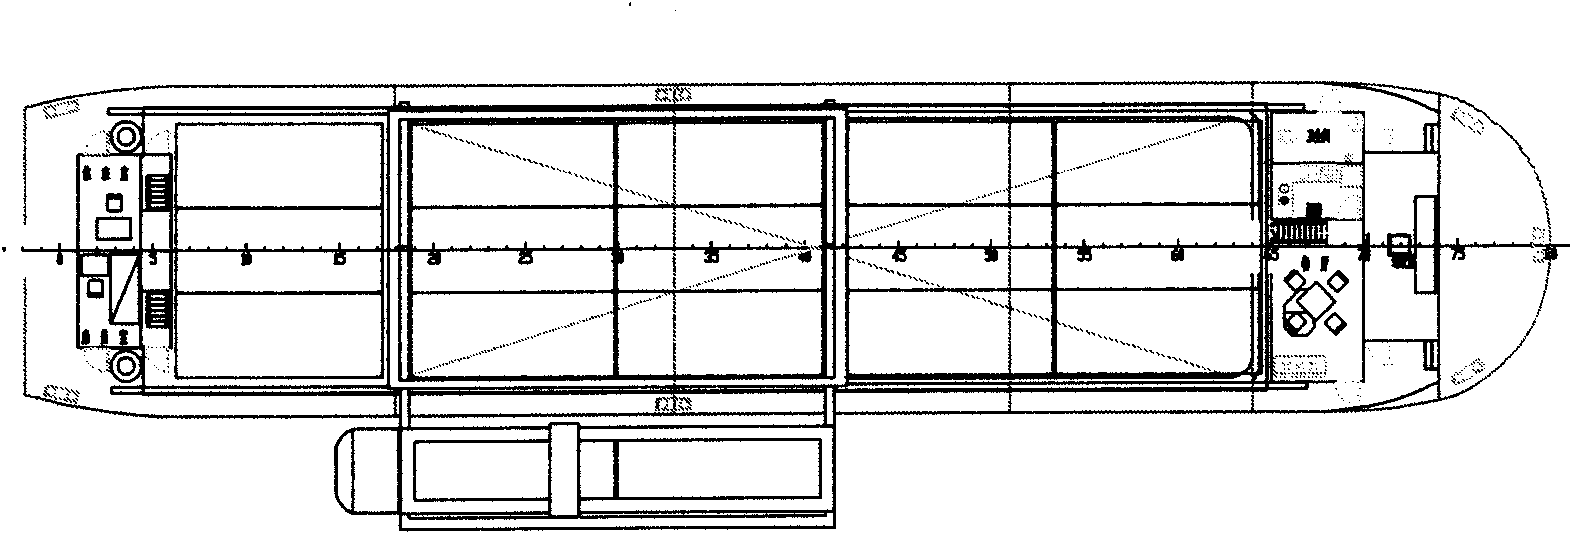 Self-chambering self-discharging container ship